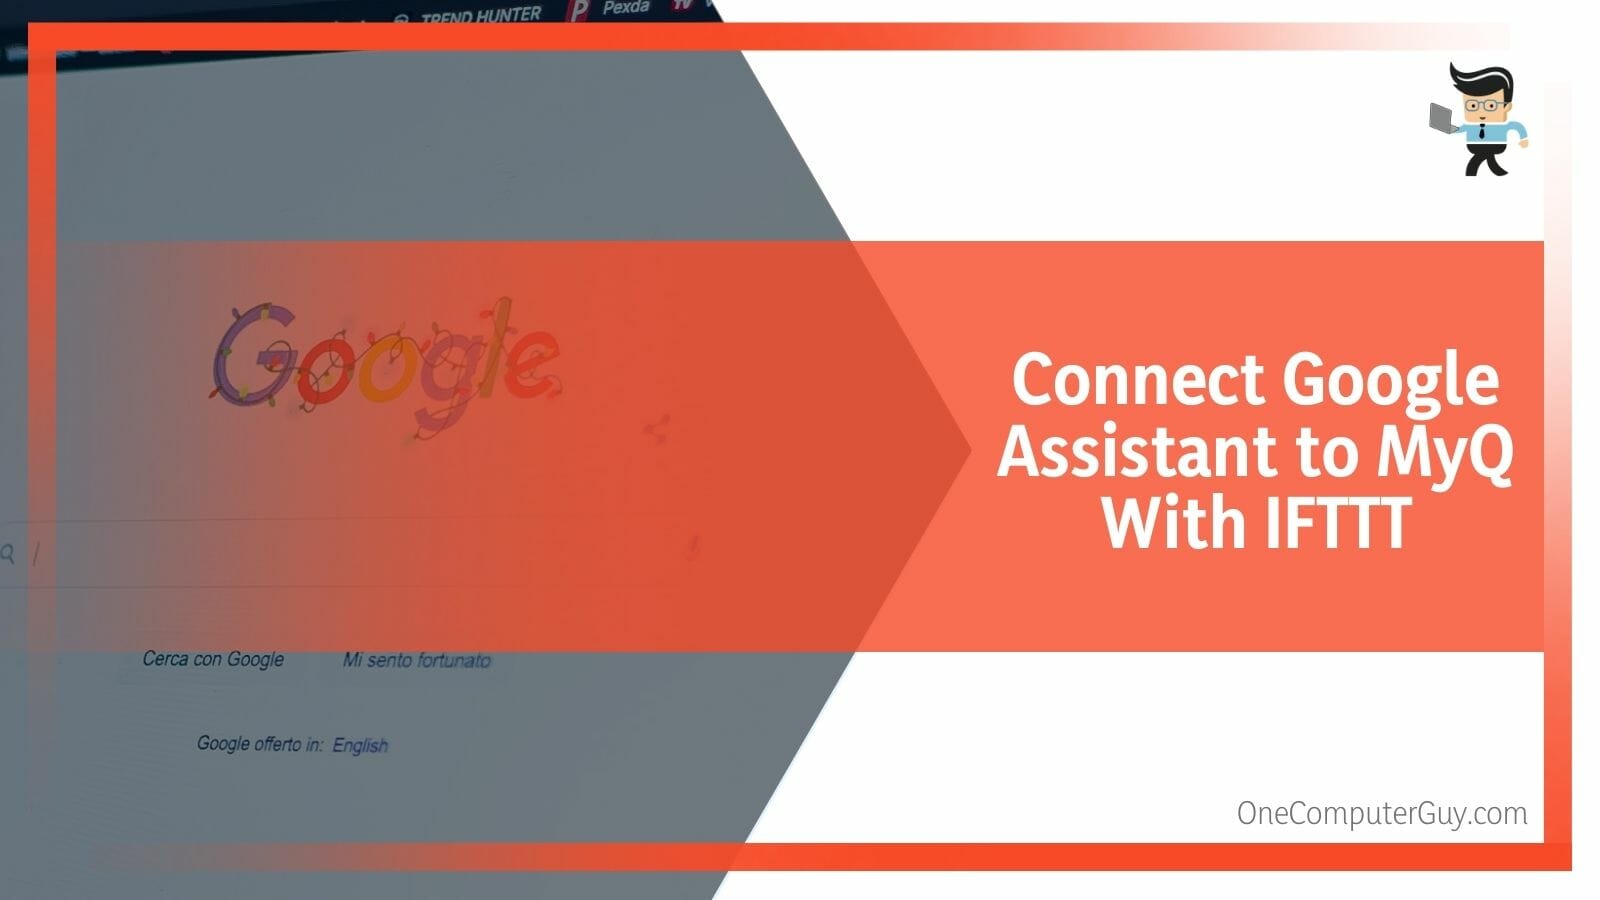 Connecting Google Assistant to MyQ With IFTTT